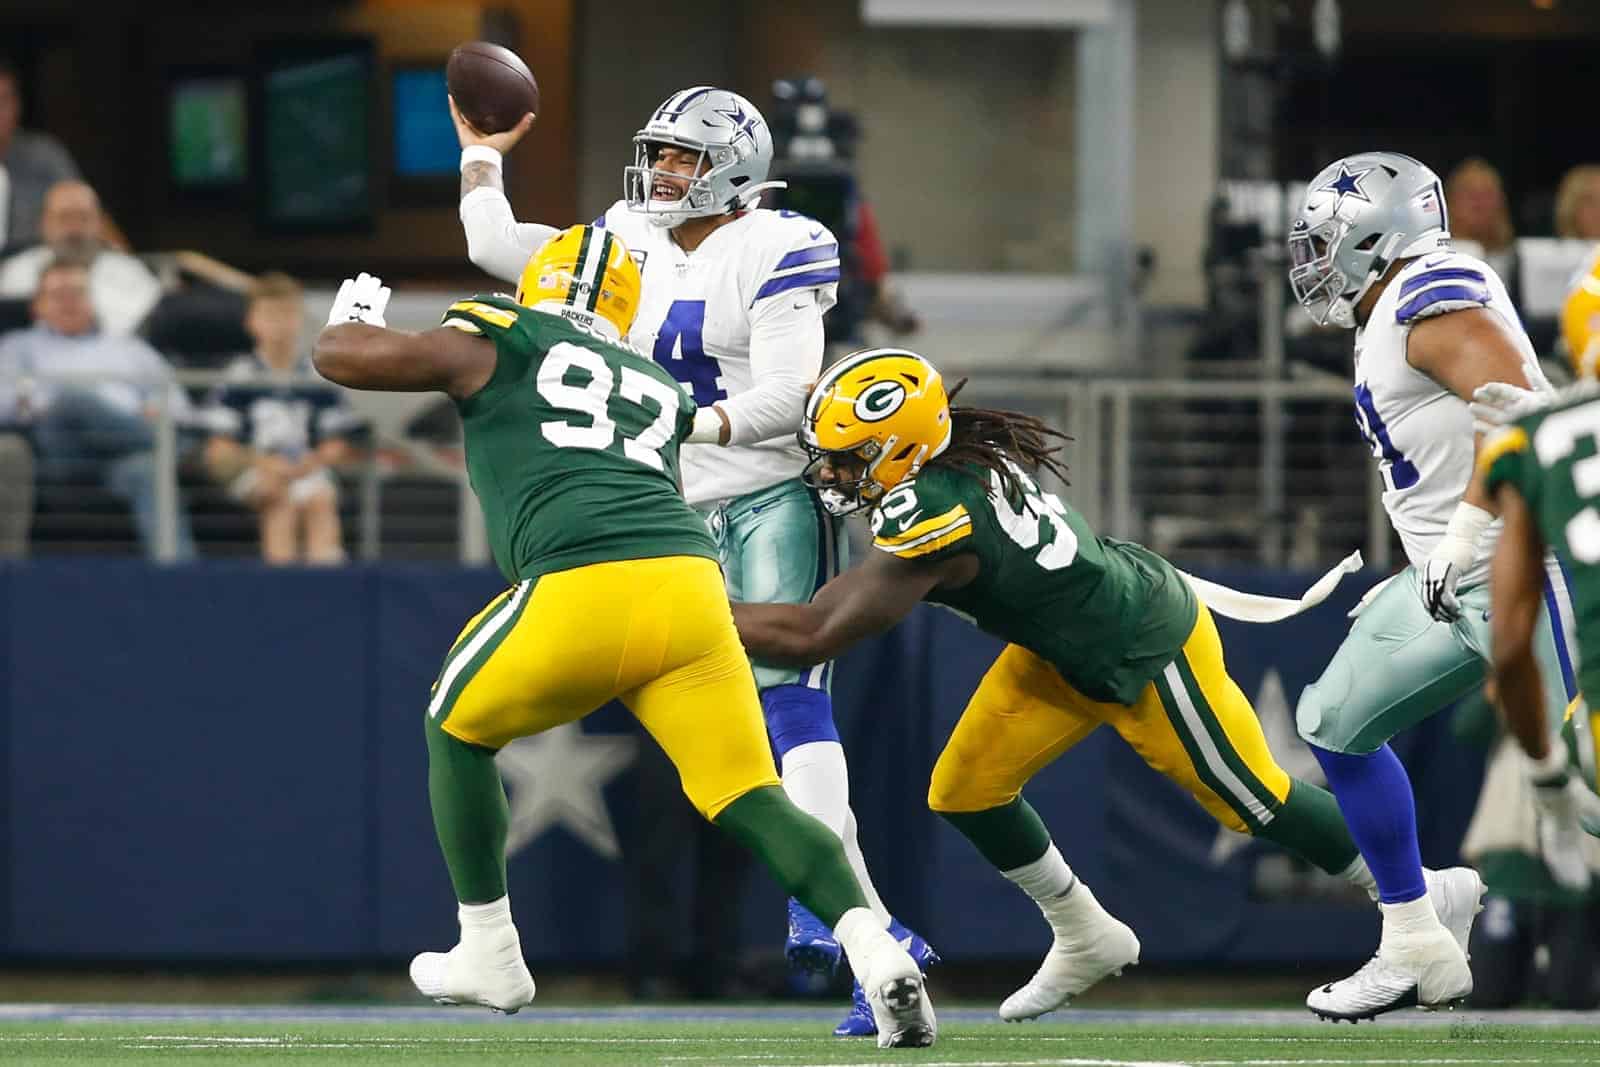 2022 NFL schedule release: Cowboys at Packers set for November 13